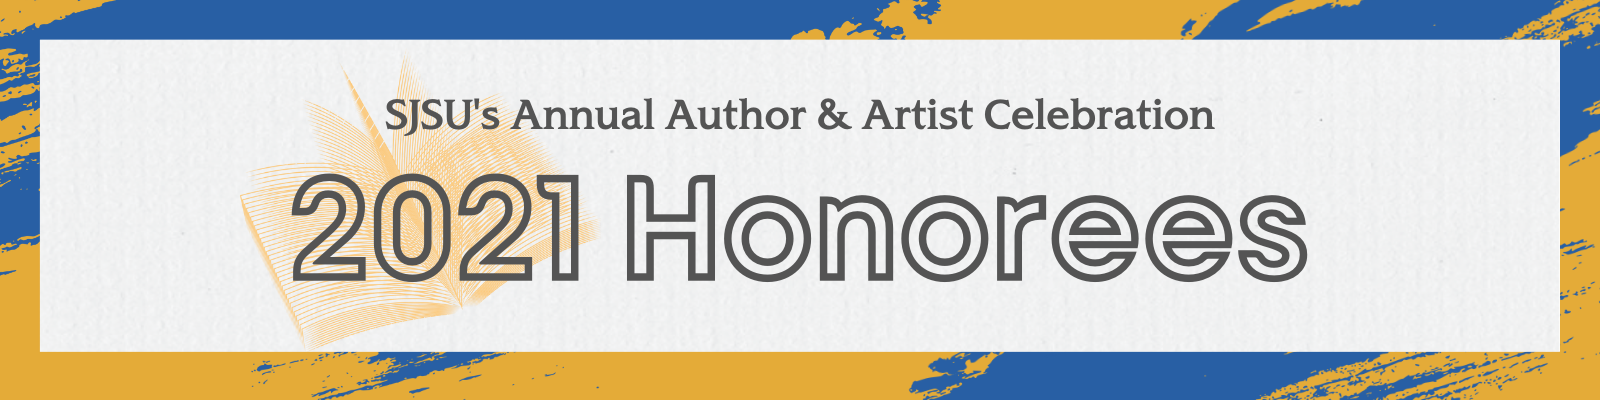 SJSU's Annual Author and Artist Celebration: 2021 Honorees